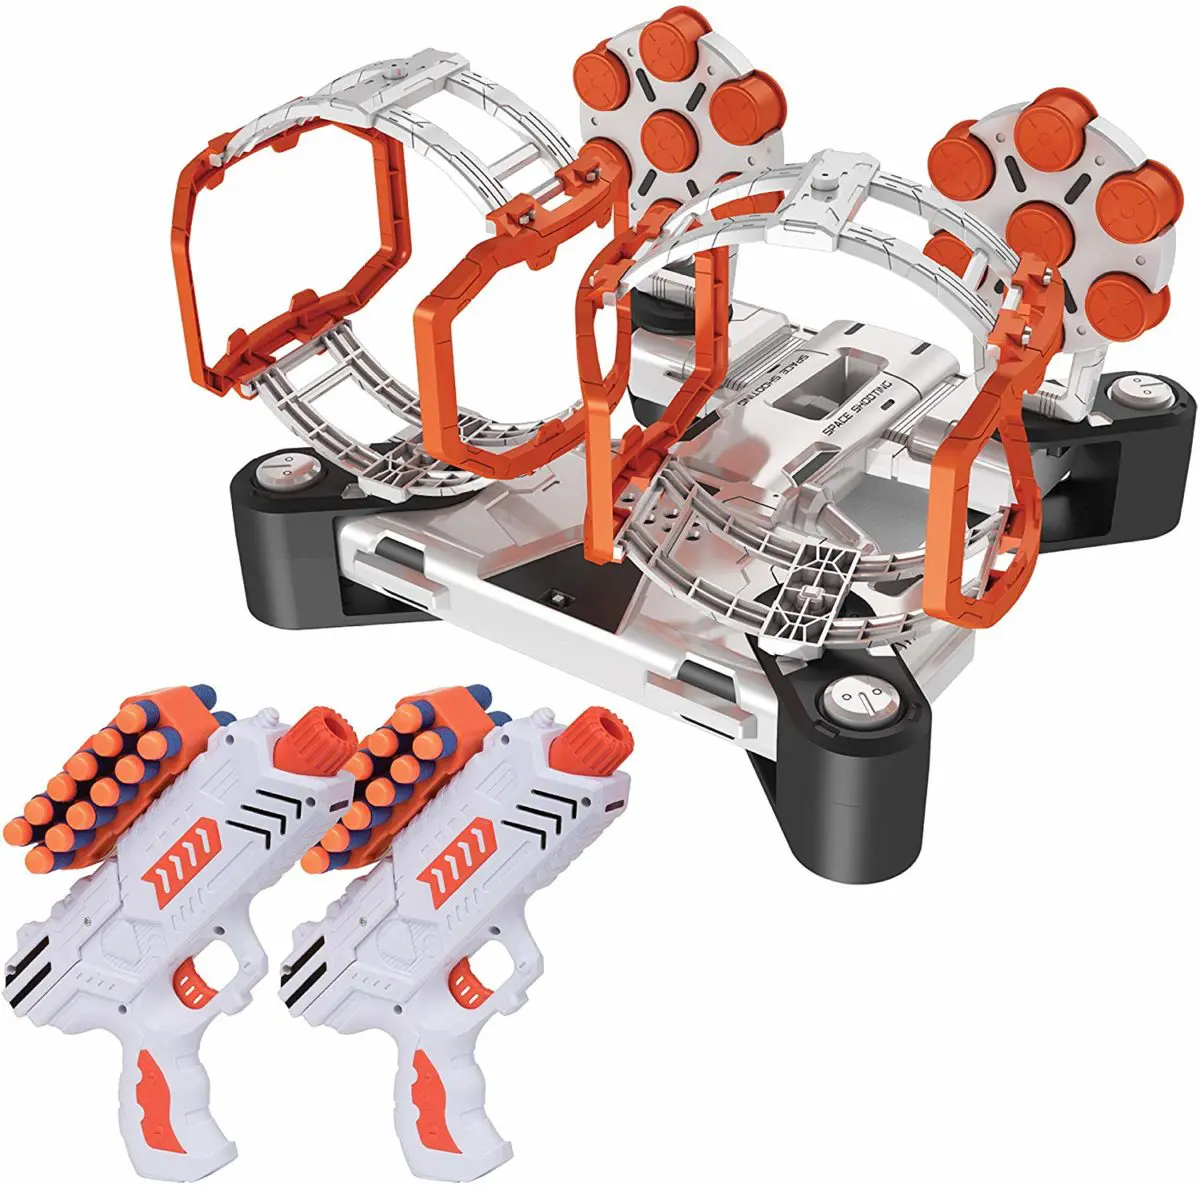 USA Toyz AstroShot Gyro Rotating Target Shooting Games - Top Toys and Gifts for Seven Year Old Boys 1